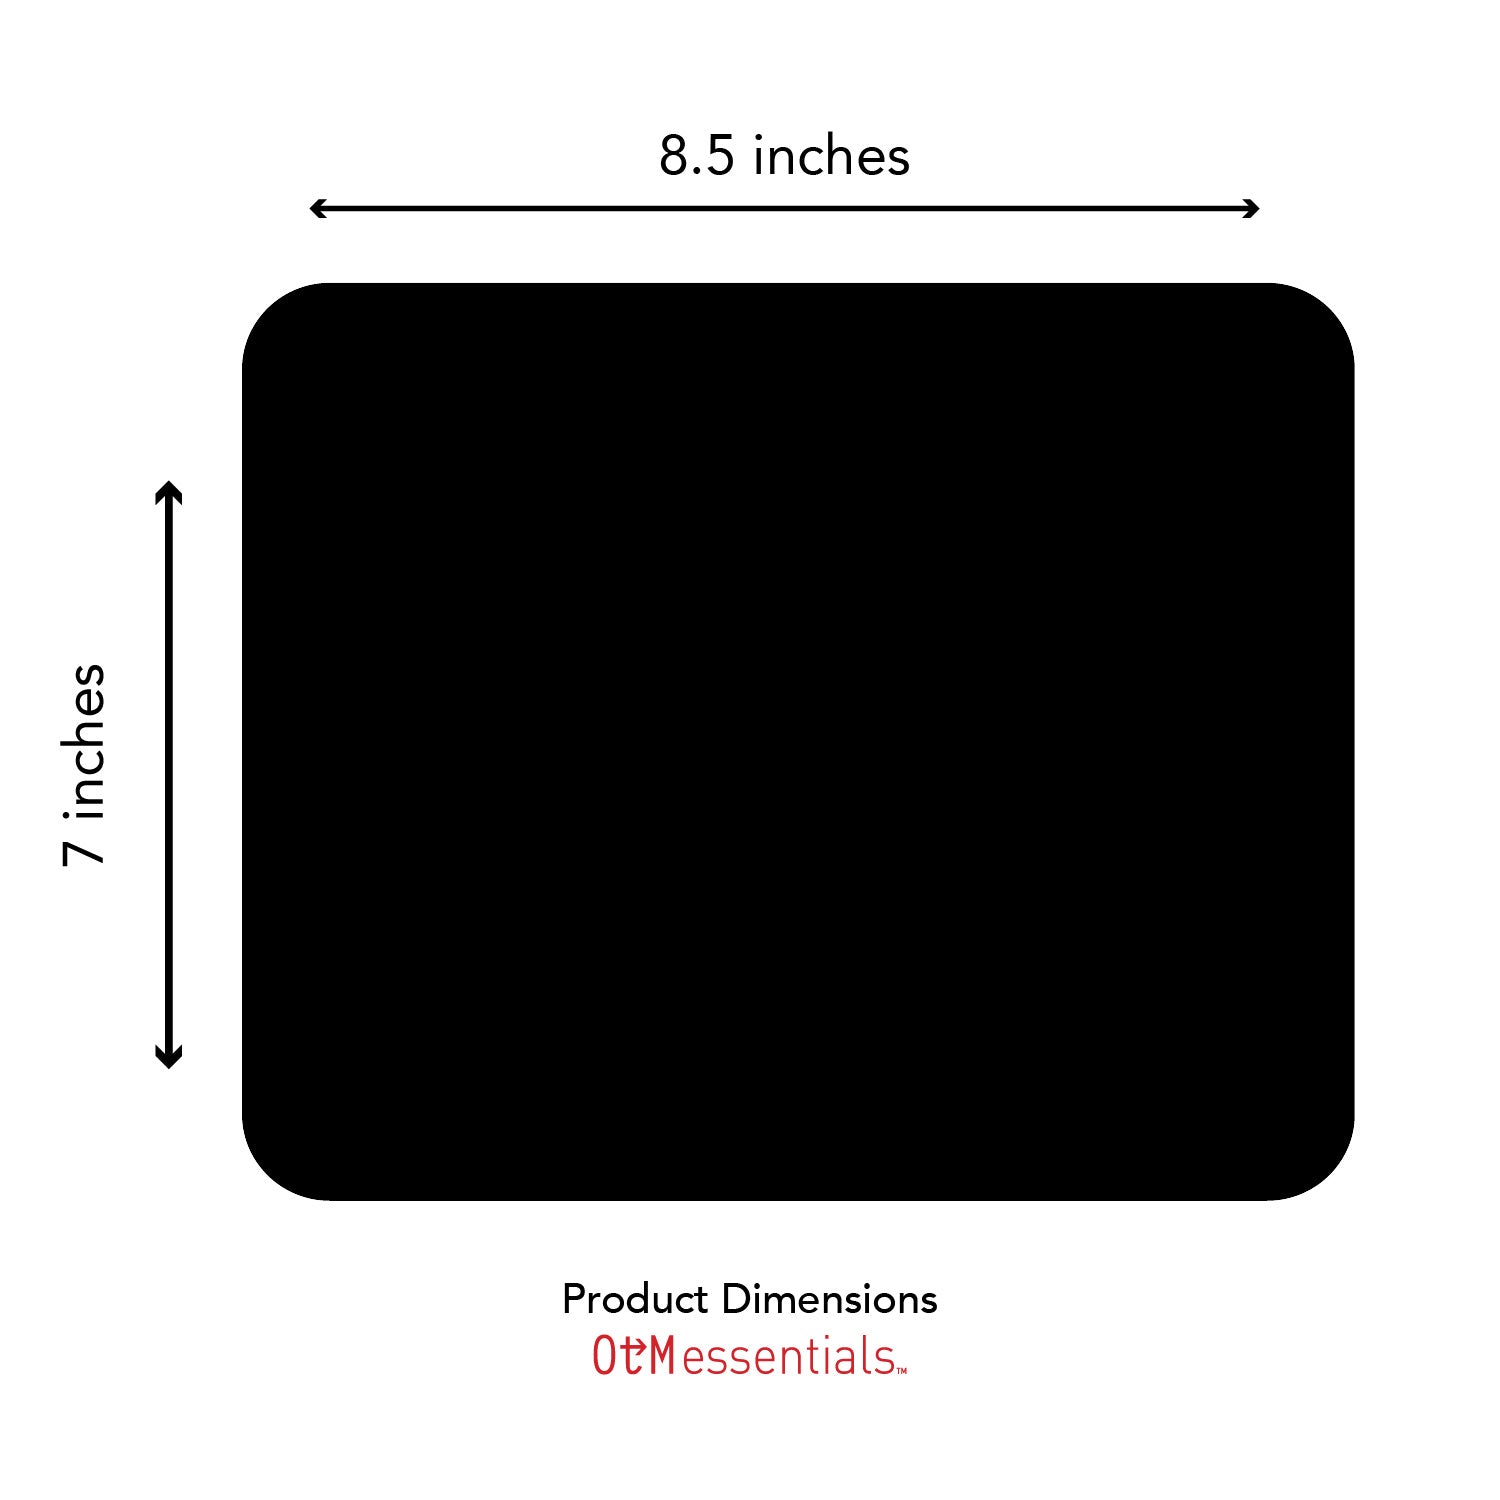 OC-BAY2-MH38A, Product Dimensions